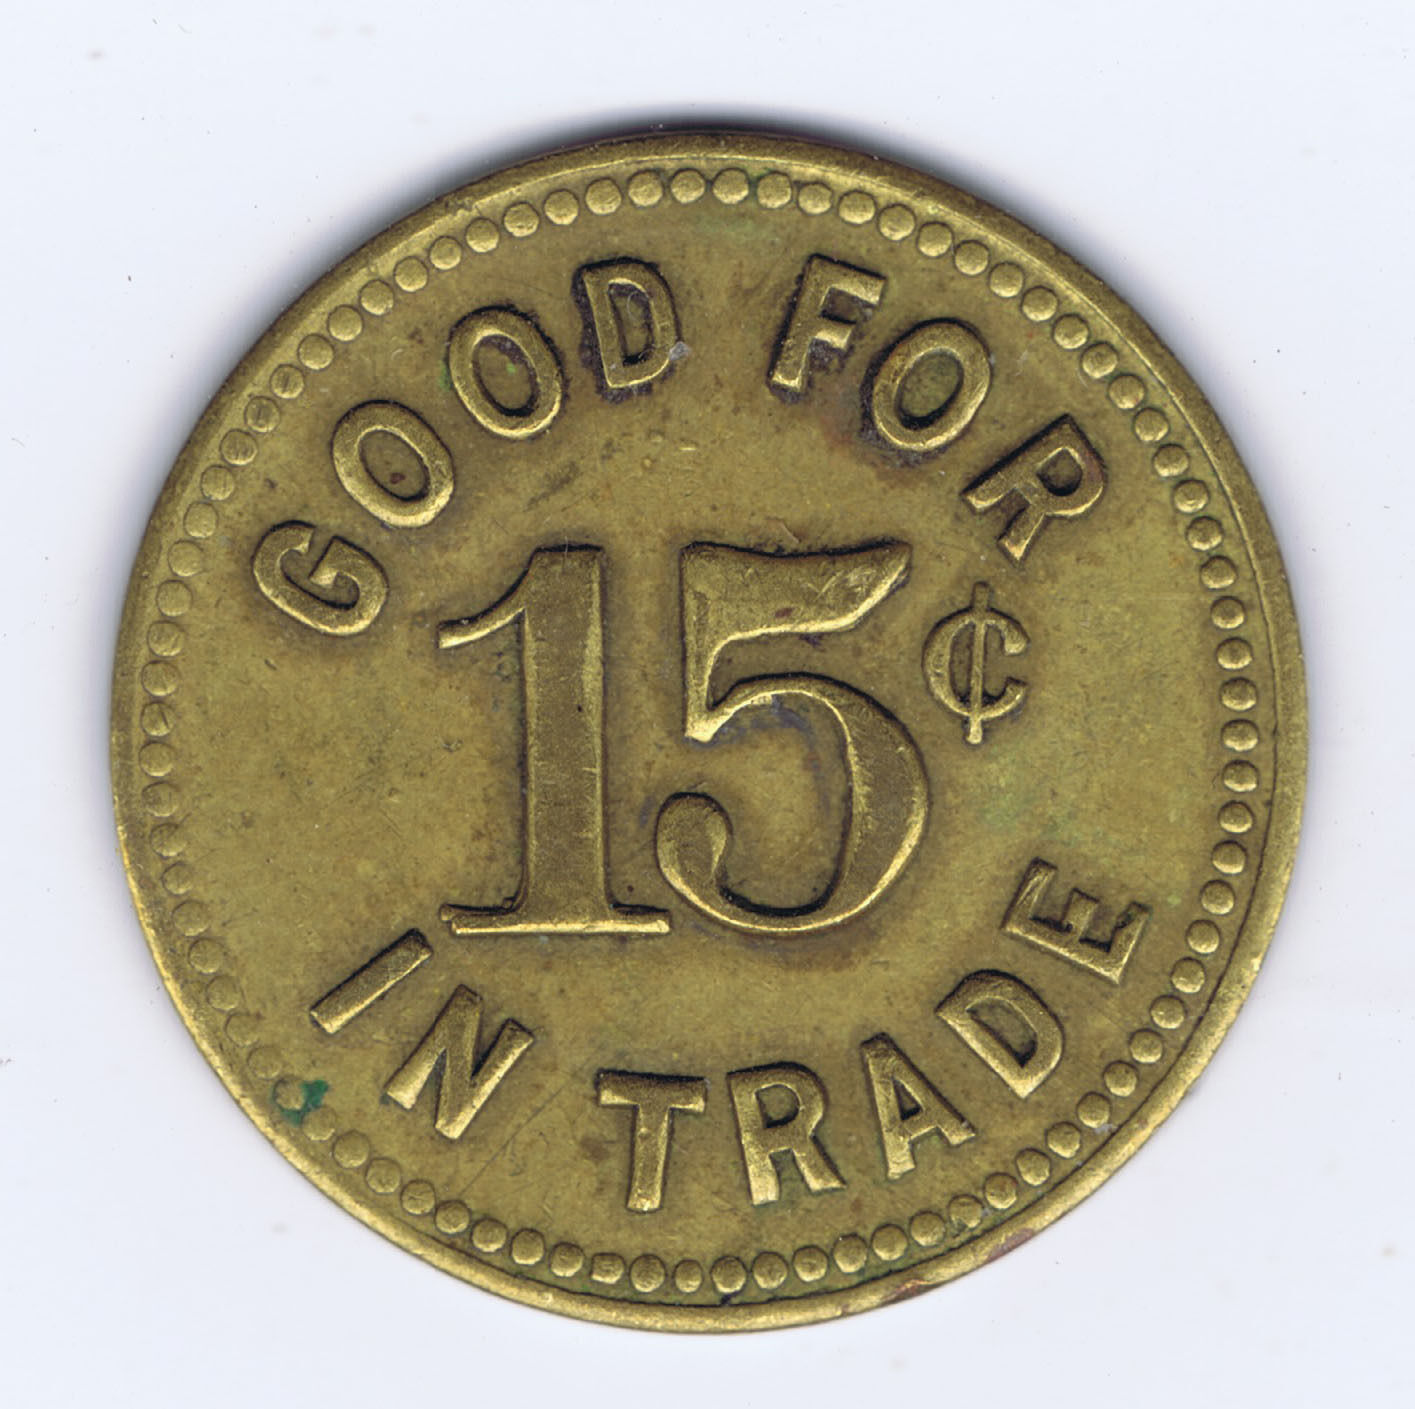 GOOD FOR 15¢ IN TRADE ITALIAN CIRCLE INC NEW HAVEN MEASURES APPROXIMATELY 1 INCH